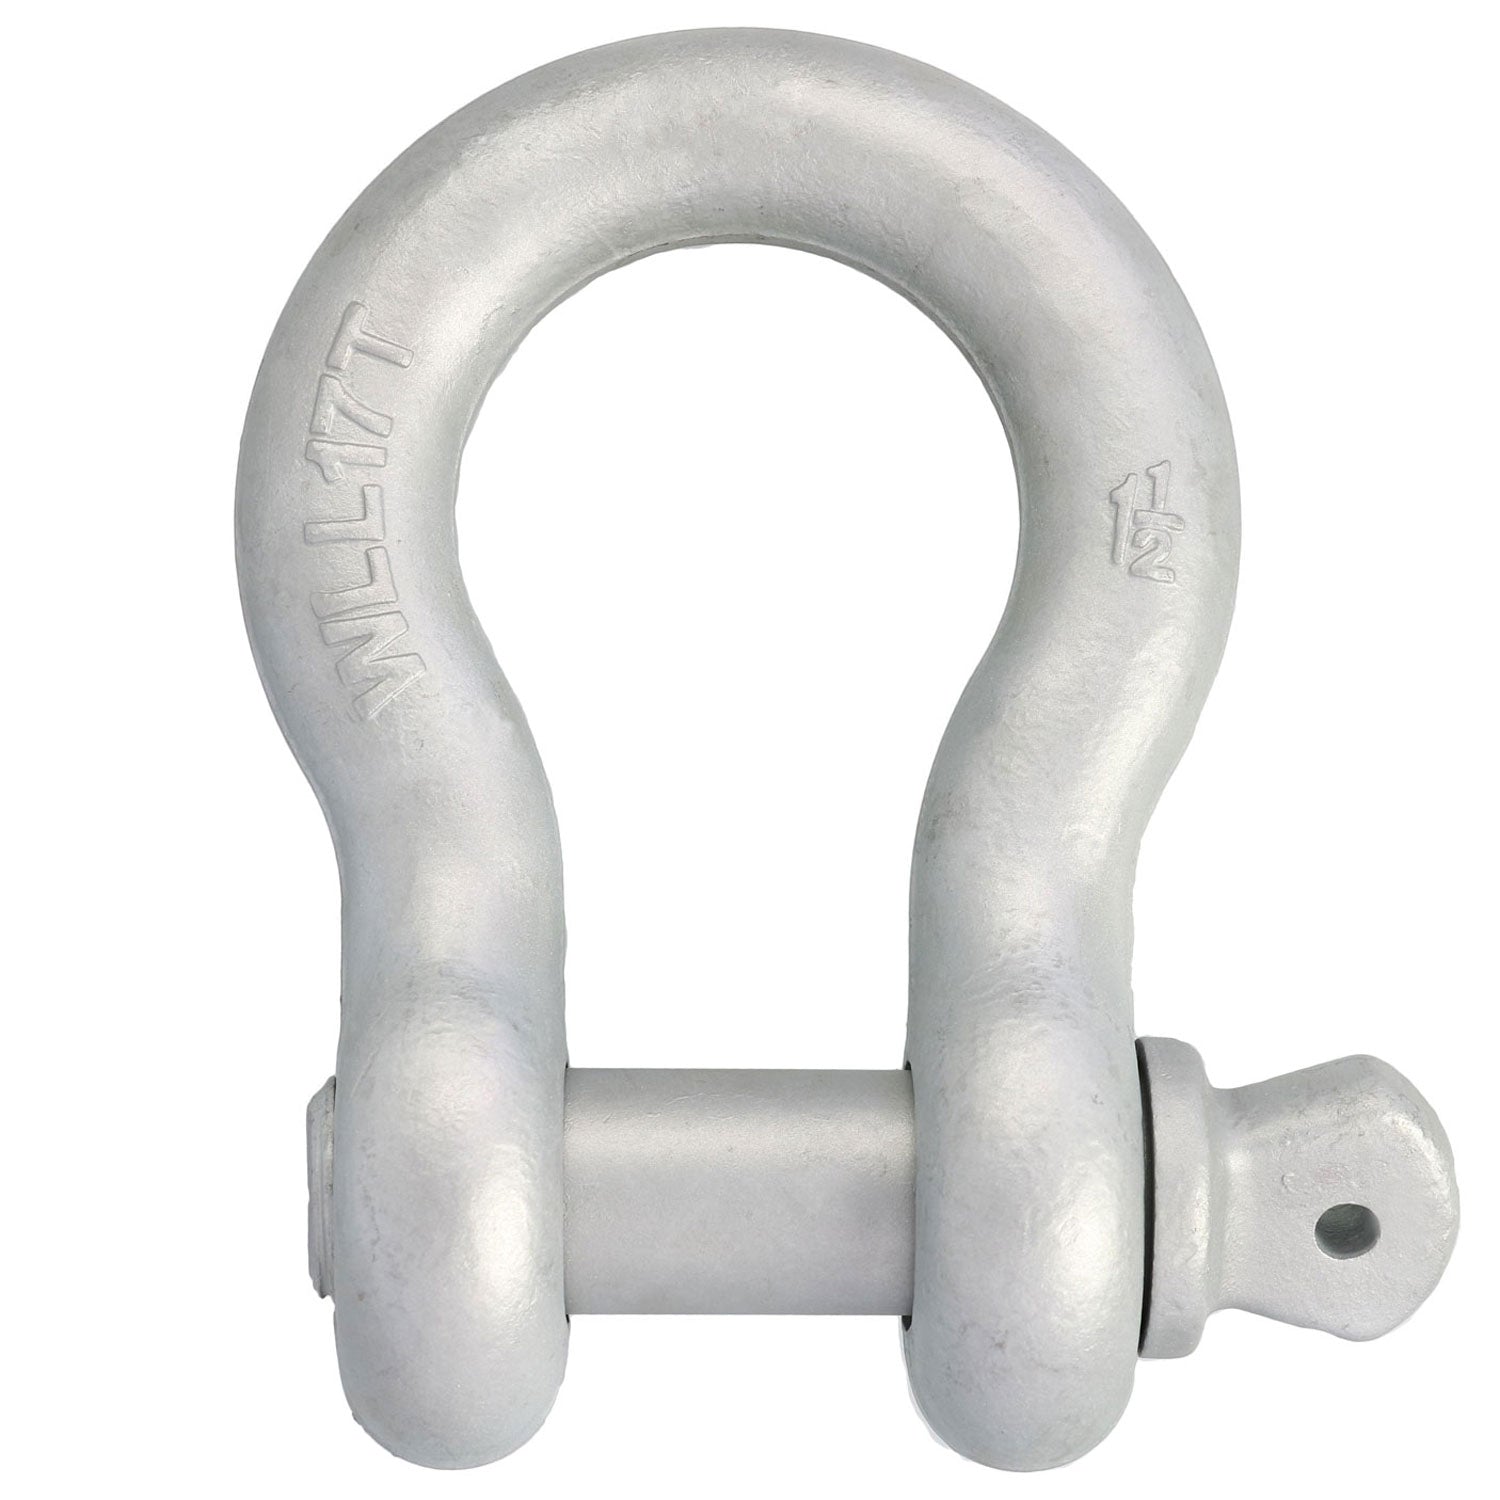 1-1/2 in., 17 ton, Galvanized Screw Pin Anchor Shackle